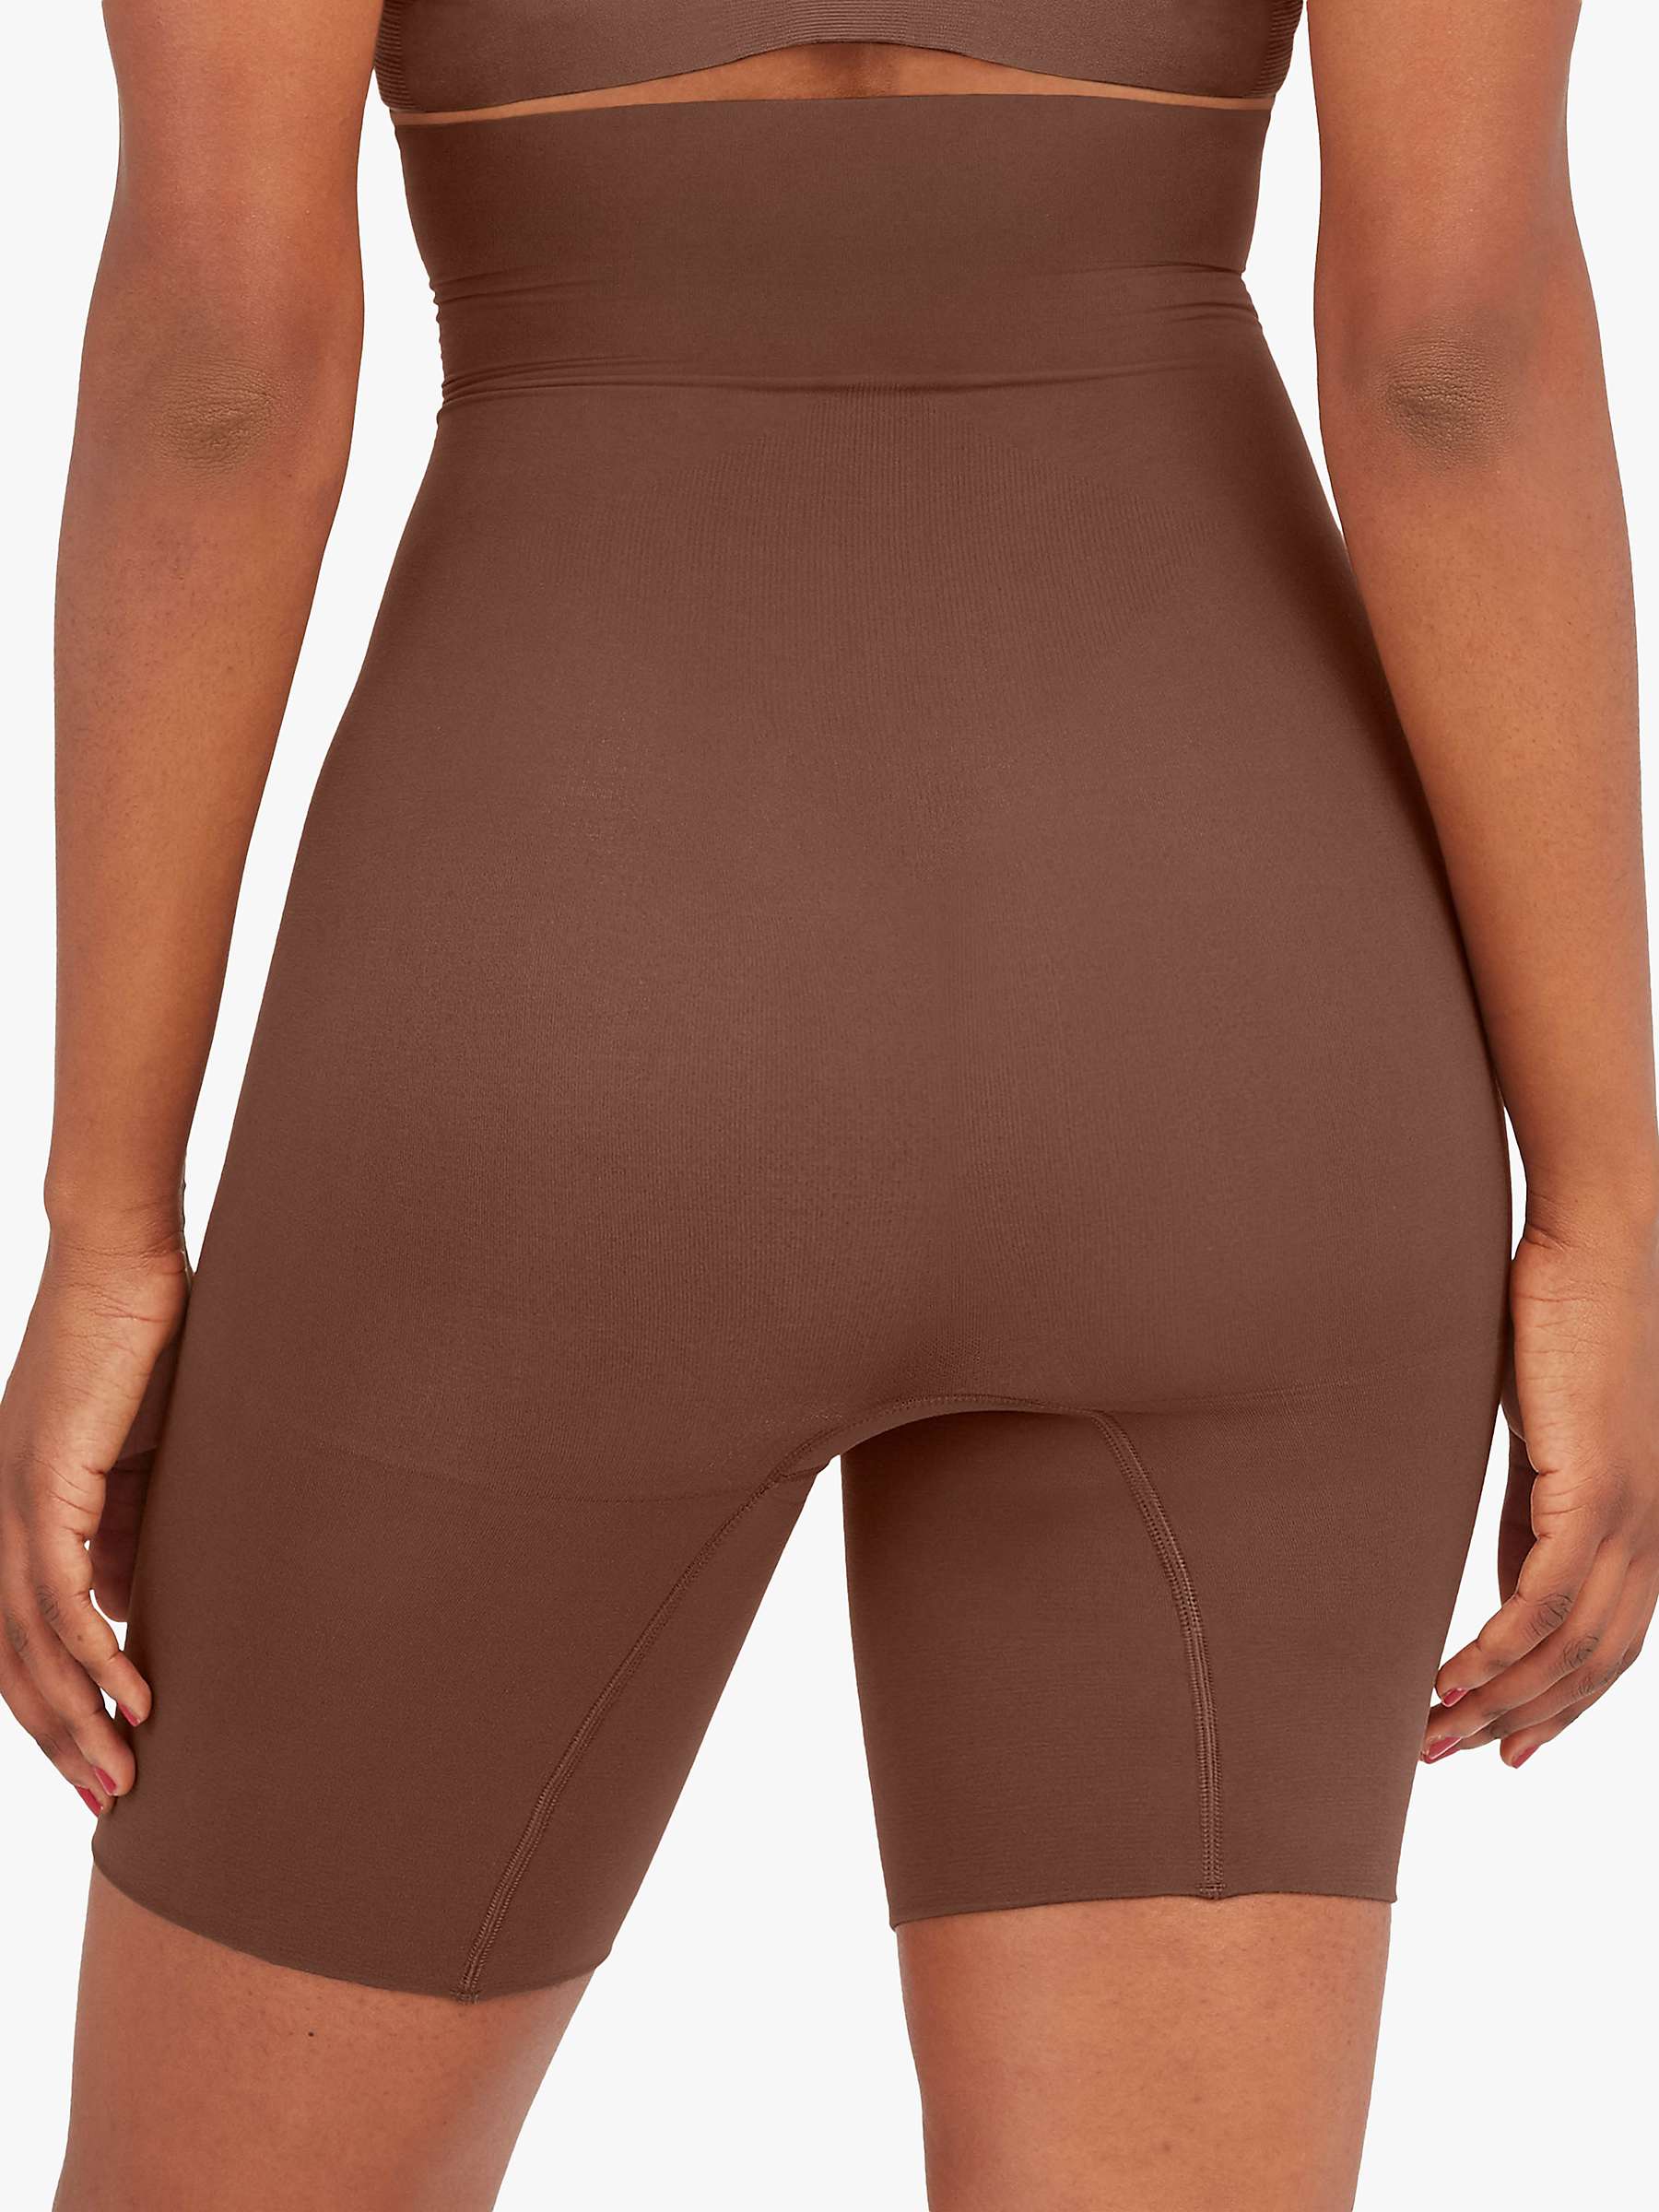 Buy Spanx Higher Power Shorts Online at johnlewis.com